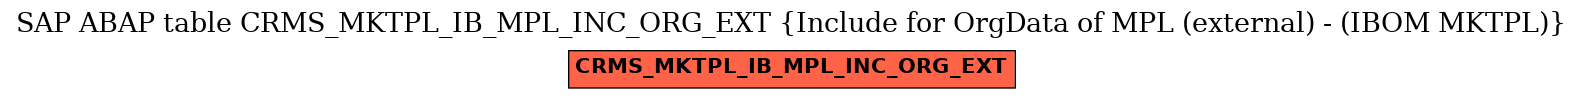 E-R Diagram for table CRMS_MKTPL_IB_MPL_INC_ORG_EXT (Include for OrgData of MPL (external) - (IBOM MKTPL))